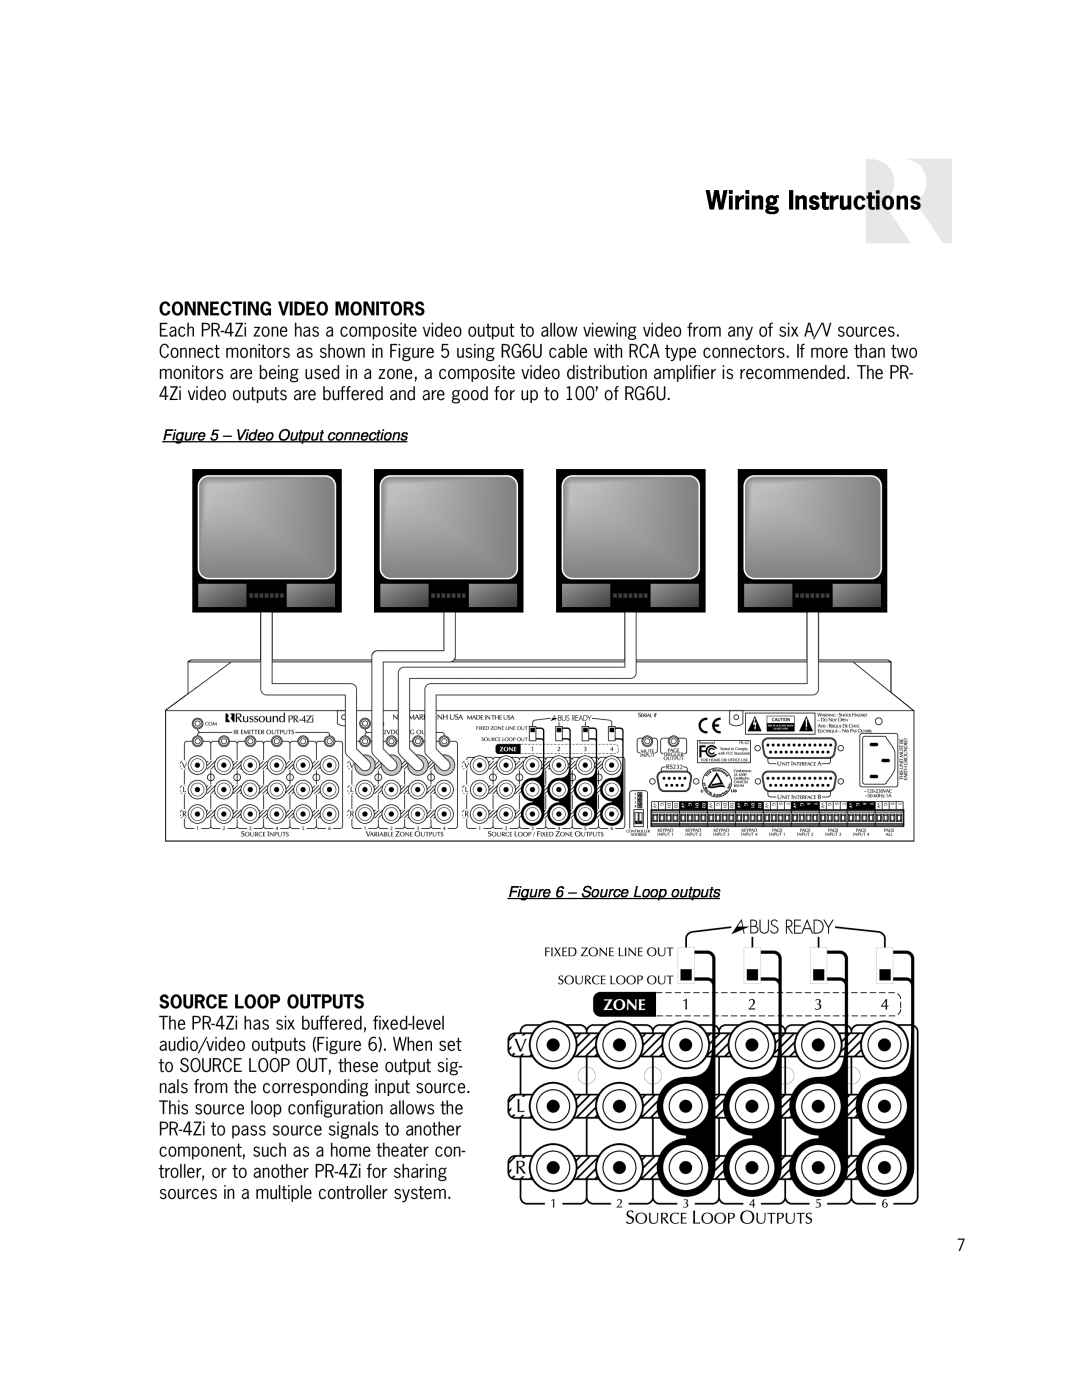 Russound PR-4Zi instruction manual Wiring Instructions, Connecting Video Monitors, Source Loop Outputs 